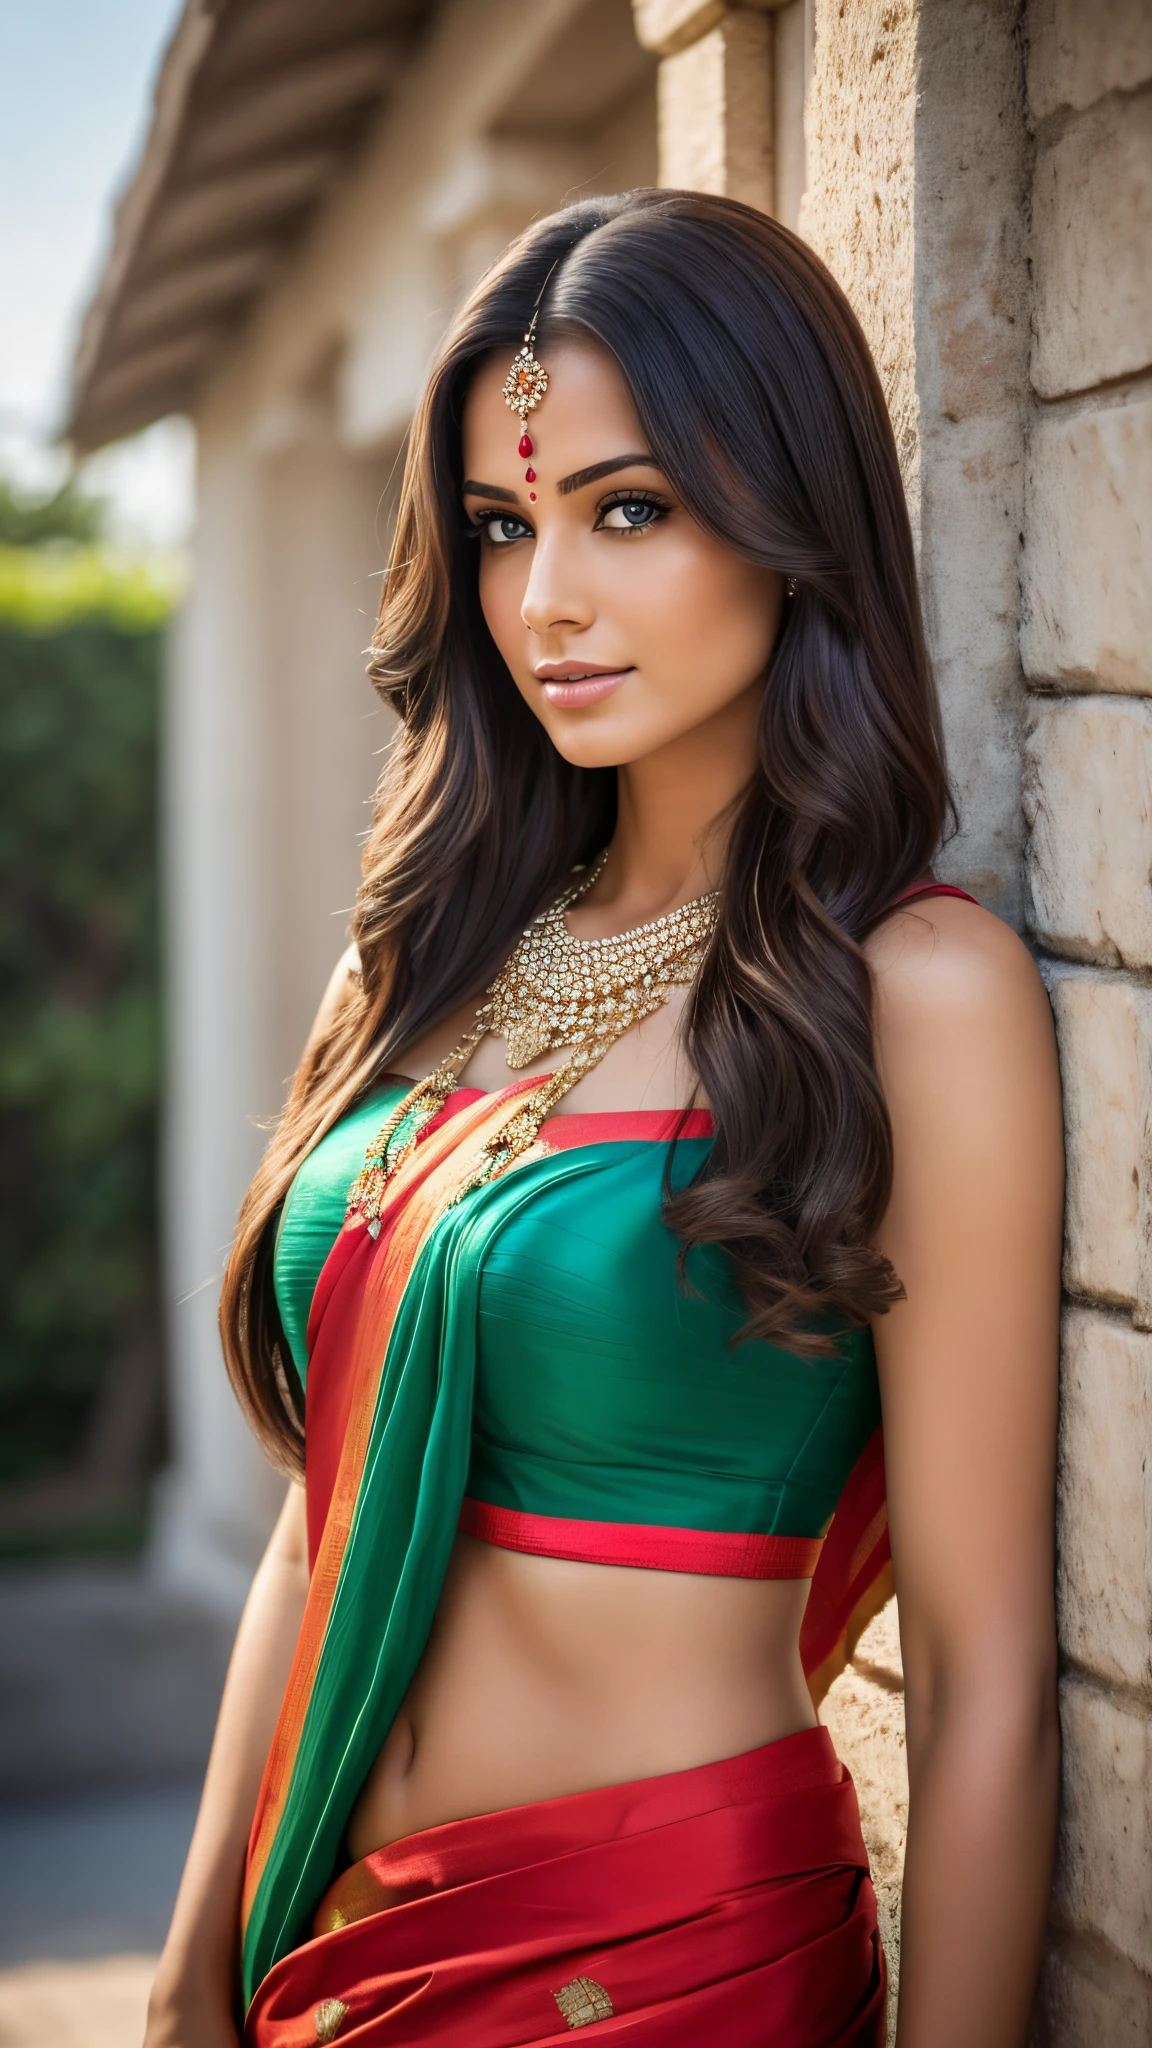 RAW portrait photo of 1 brunette woman with long hair, in front of a hindu temple, wearing a beautiful saree and jewellery, profile image, brazilan supermodel, brunette with dyed blonde hair, seminua, medium firm breasts, I am, reveals your body, transparentes, highy detailed, skin imperfections:1.1), detailed, specular illumination, dslr, ultra quality, sharp focus, grain of film, Sharp features, soft natural lighting, magic photography, natural lightting, Photo realism, ultra detali, 8K, best qualityer, Ultra Alto Nadaolution, (fotorrealisitic: 1.4), high resolution, detailed, raw-photo, sharp re, (8K, 4K, best qualityer, Cao Cao, Ultra Cao Cao nada:1.1), (Masterpiece artwork, realisitic, realisitic:1.1), Raw 50&#39;s style